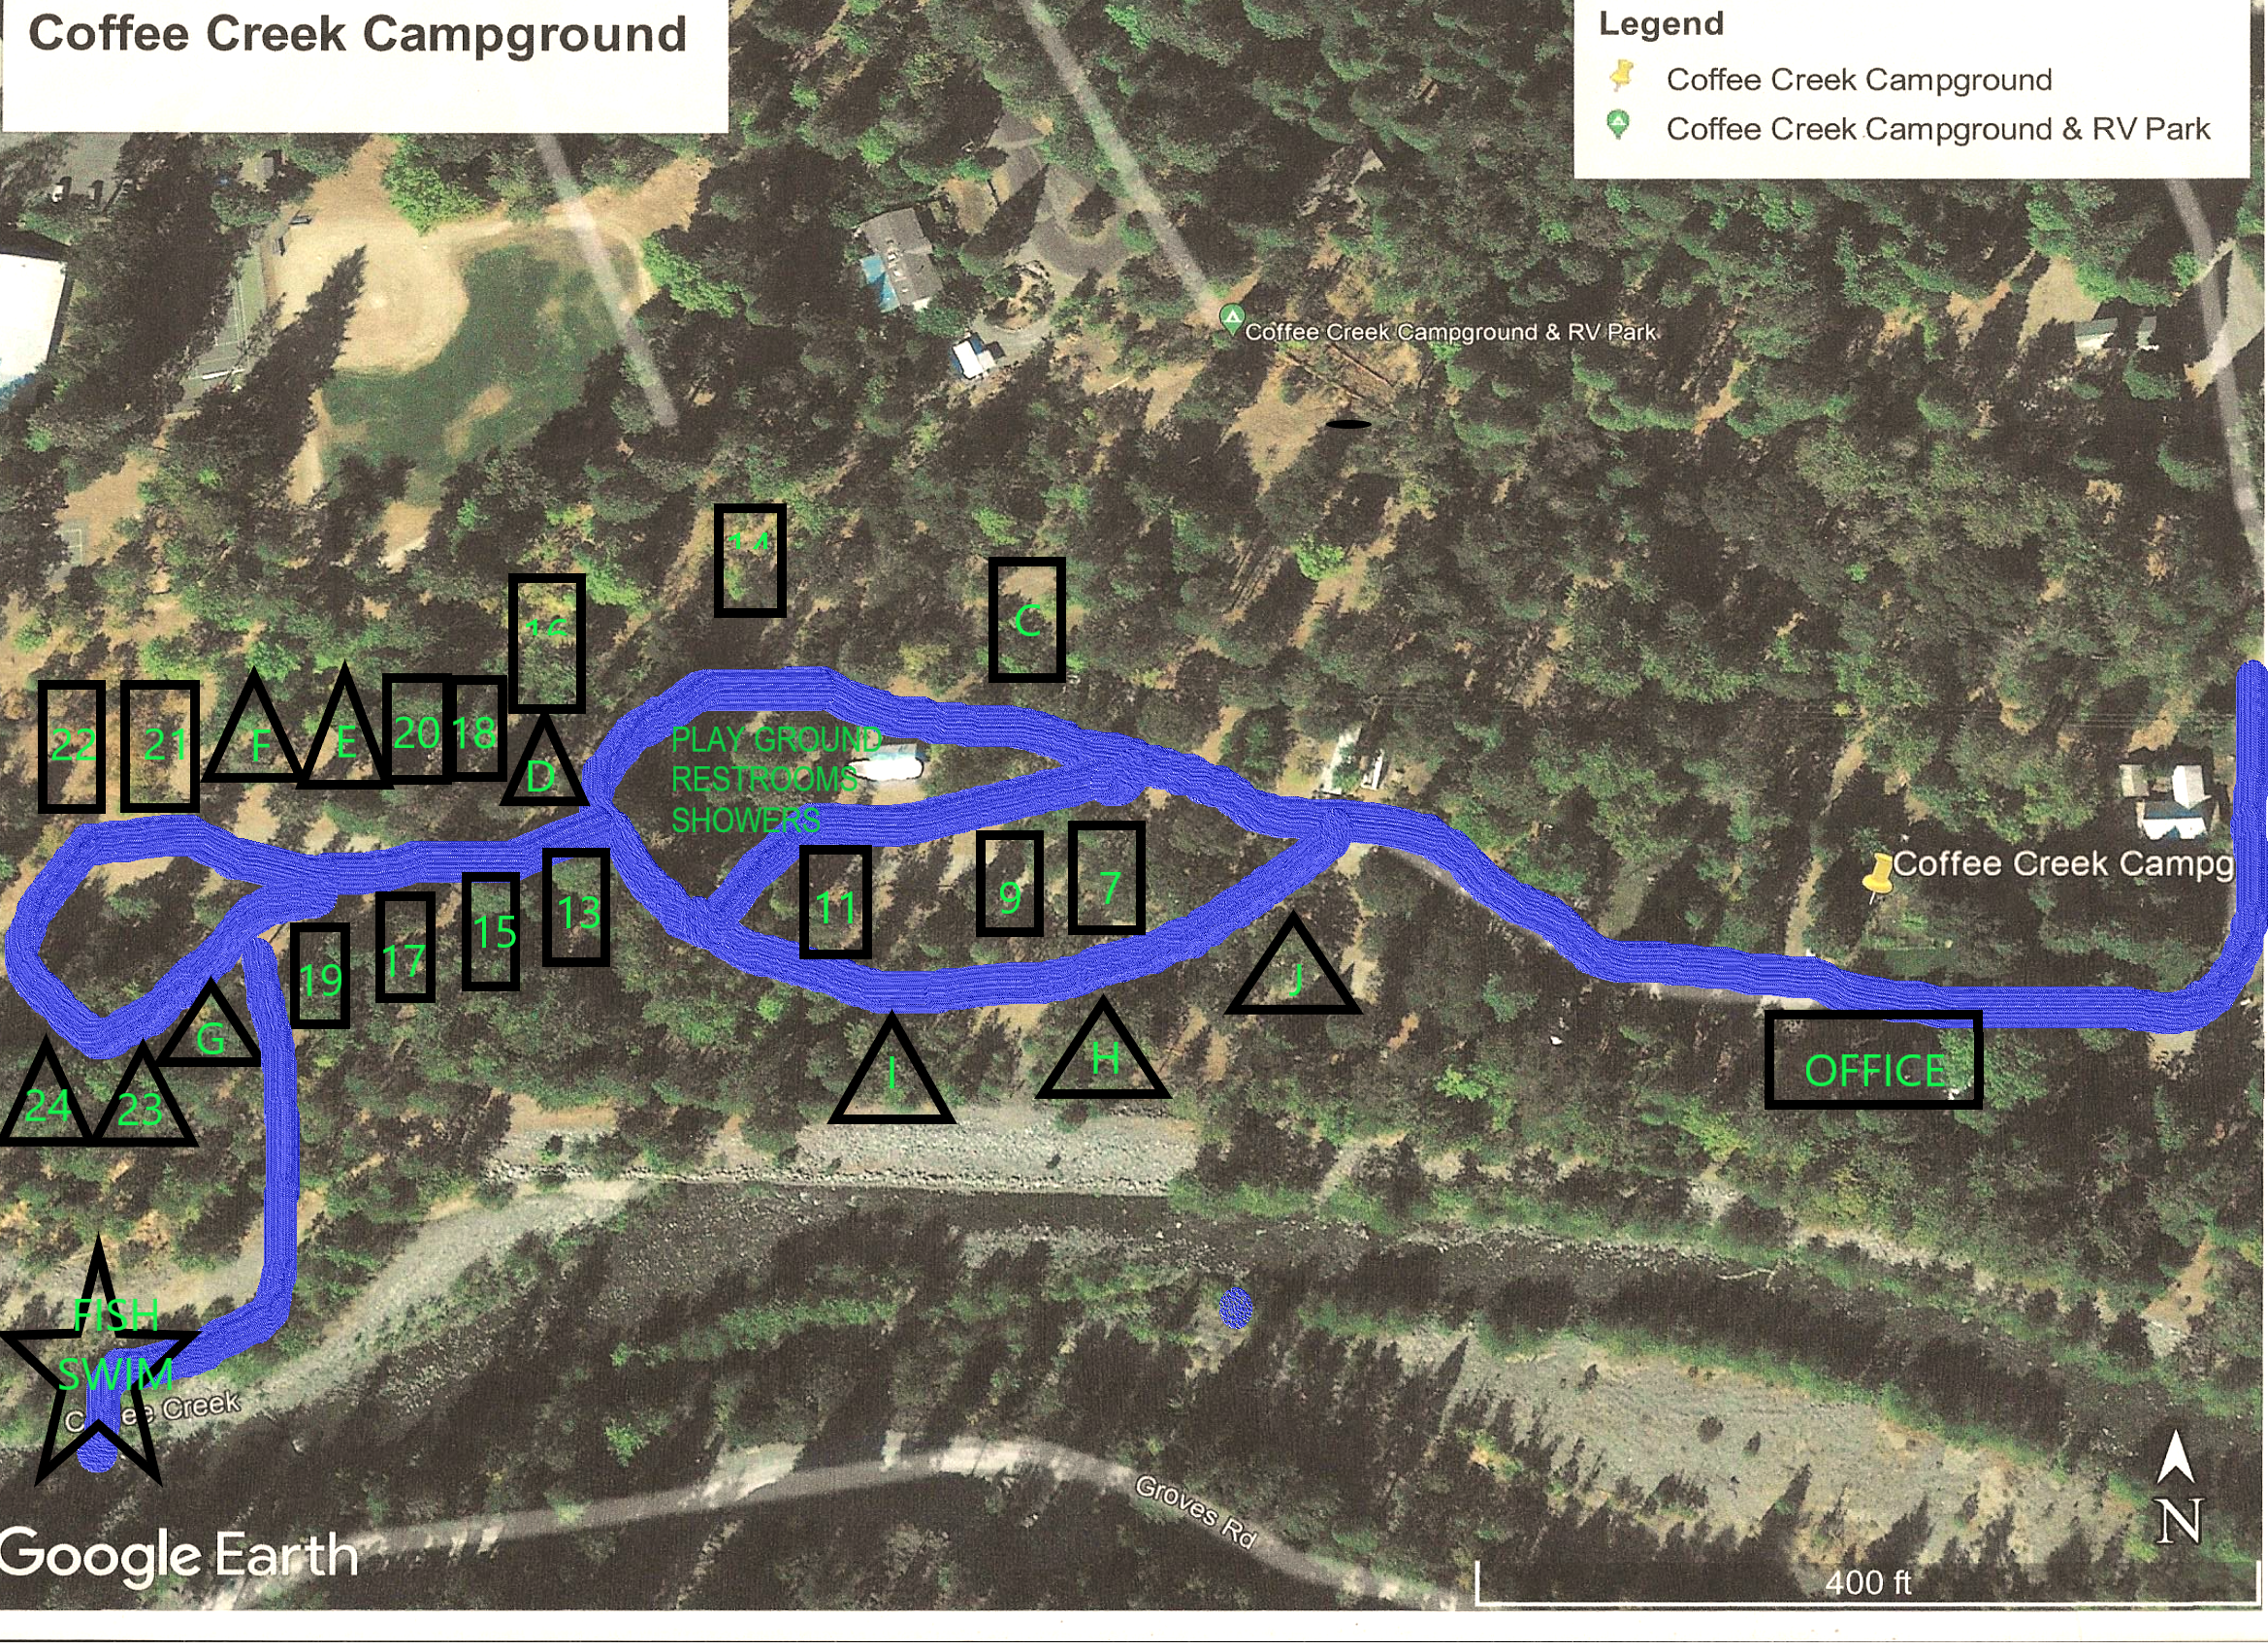 CAMPGROUND MAP<br />
Road leading next to main office, around park, and down to Creek is blue. RV spots are labeled with Rectangles and tent camping sites are labeled with triangles. 